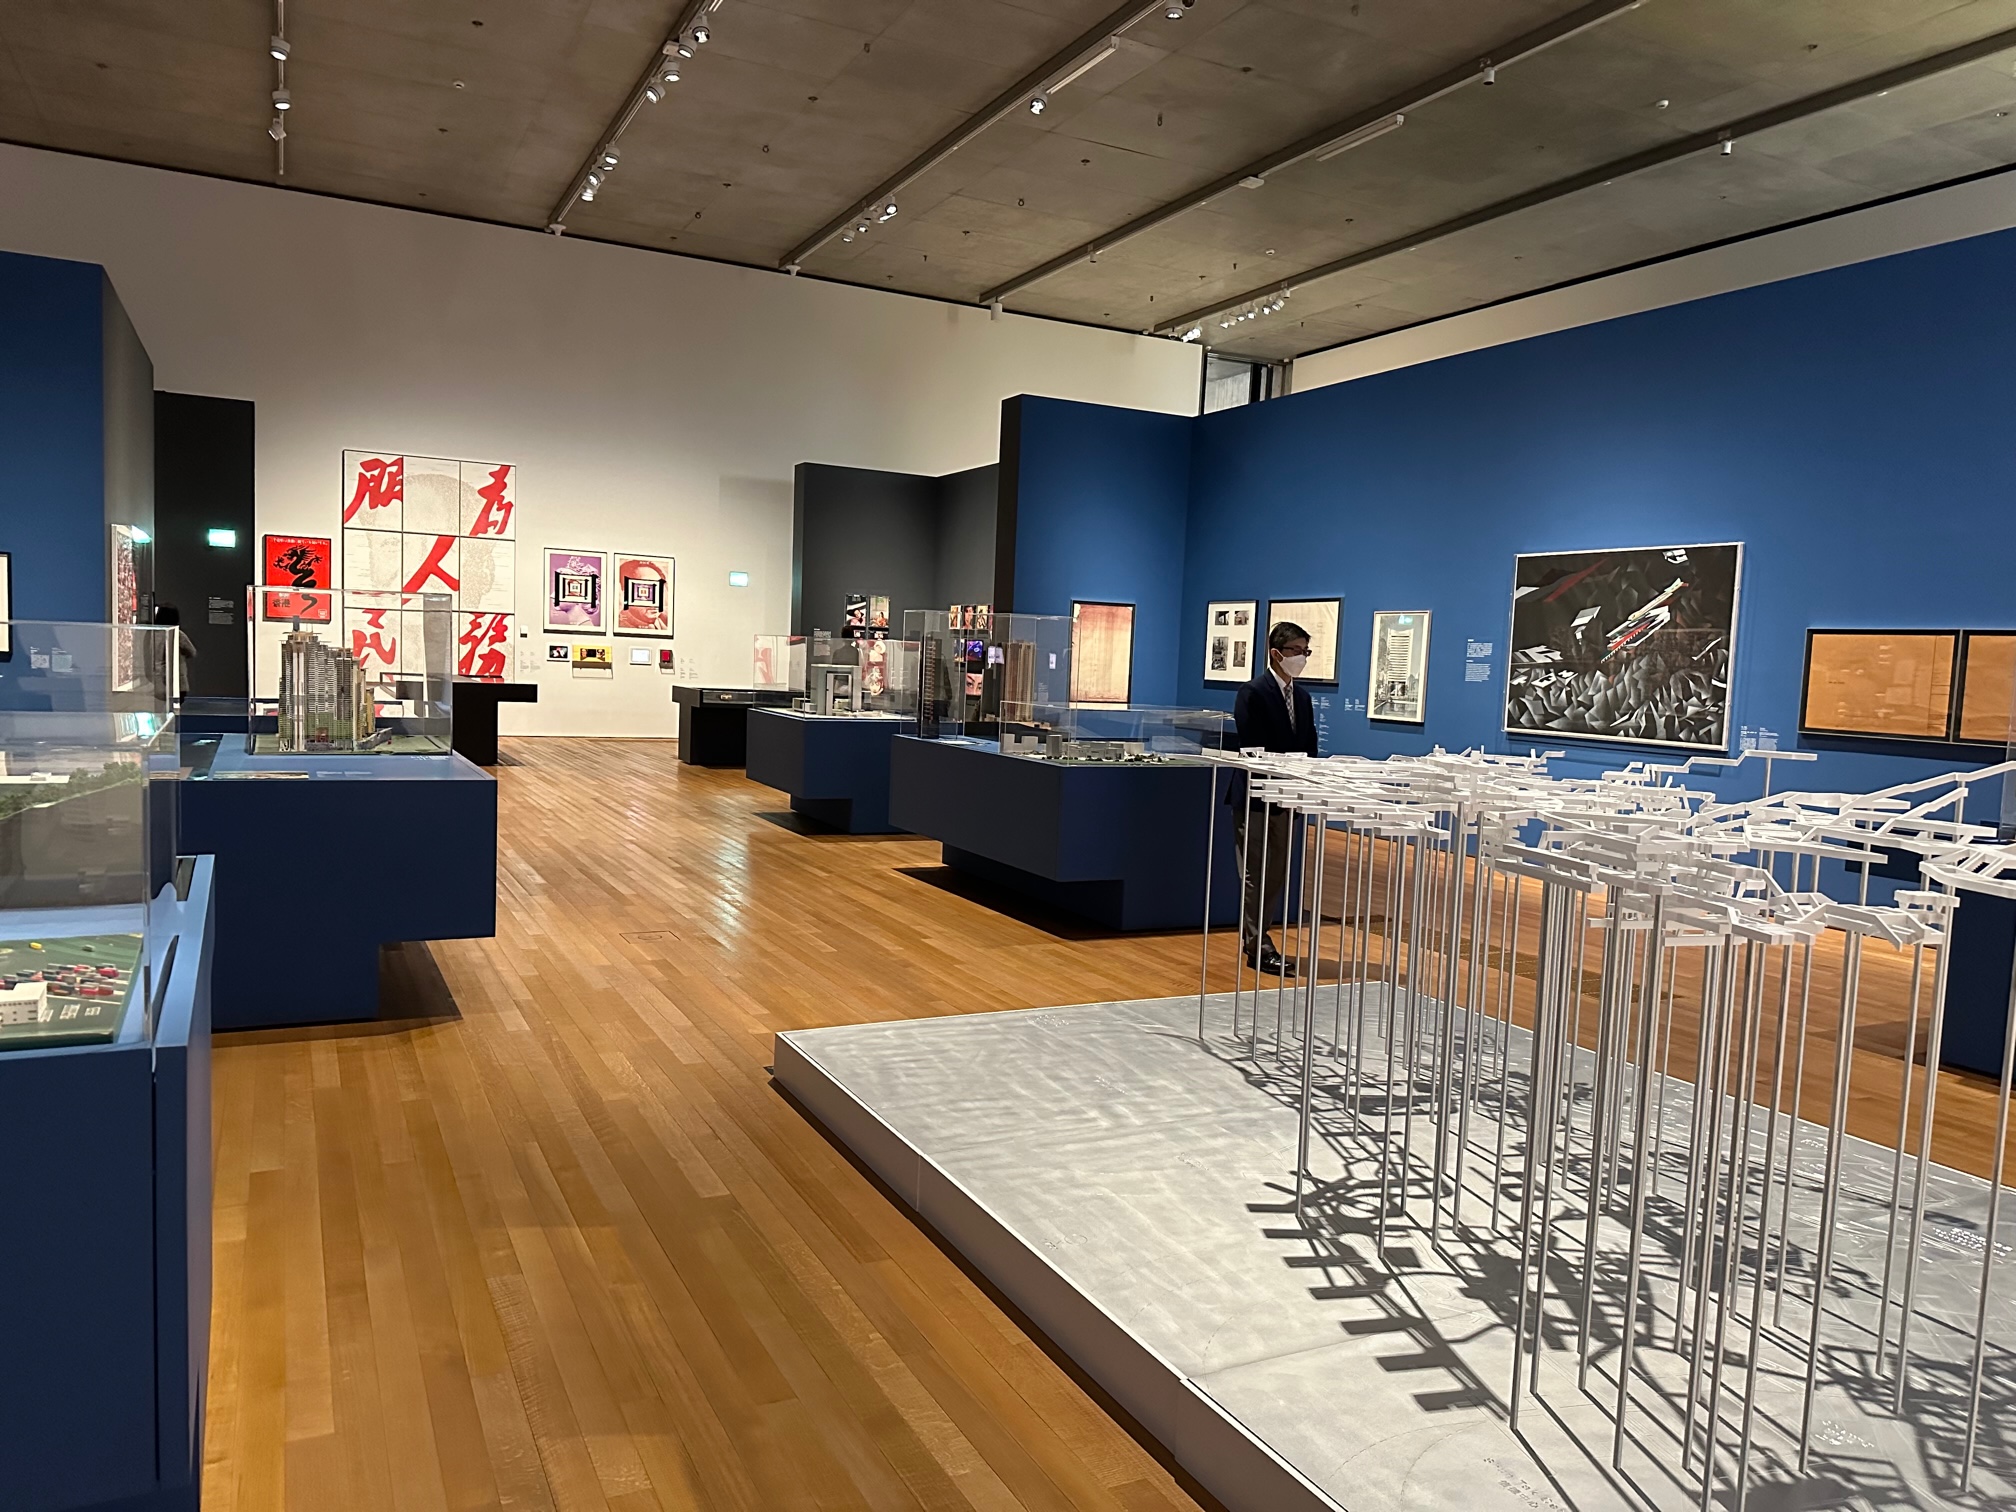 The Hong Kong: Here and Beyond exhibit at West Kowloon's M+ tells a rich but incomplete story of contemporary Hong Kong through visual culture 